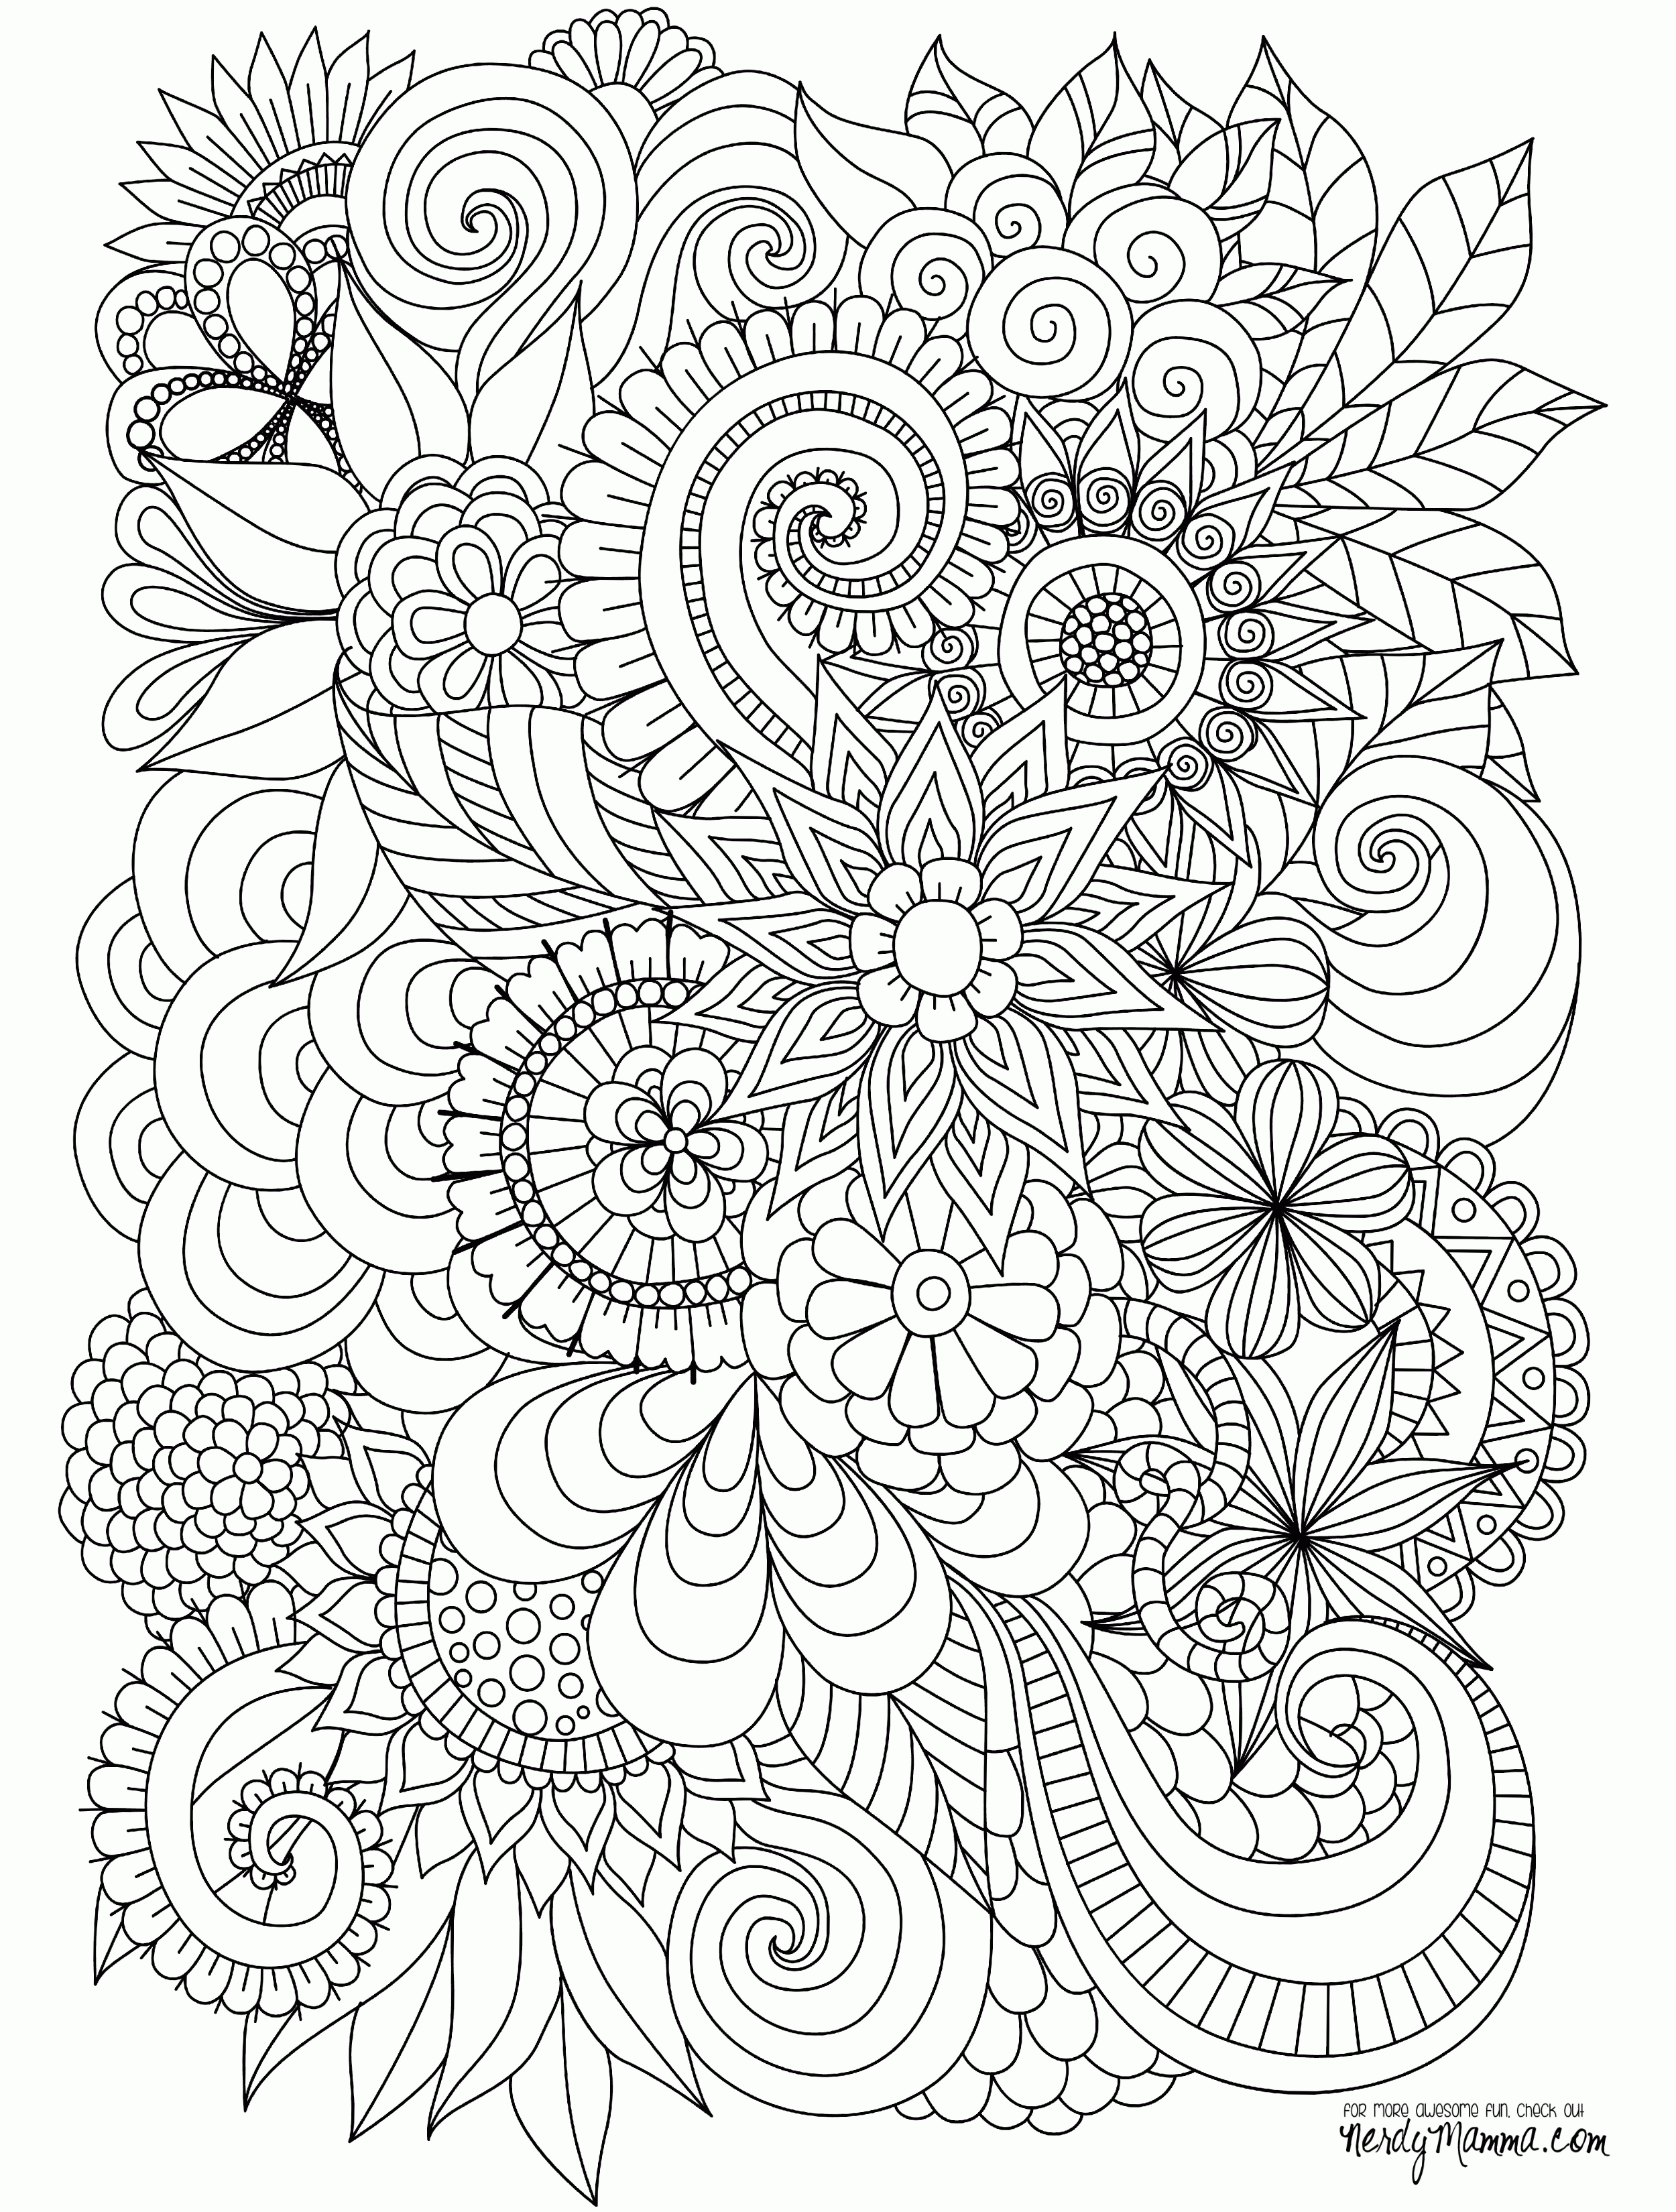 Printable Adult Coloring Pages - cristo3d